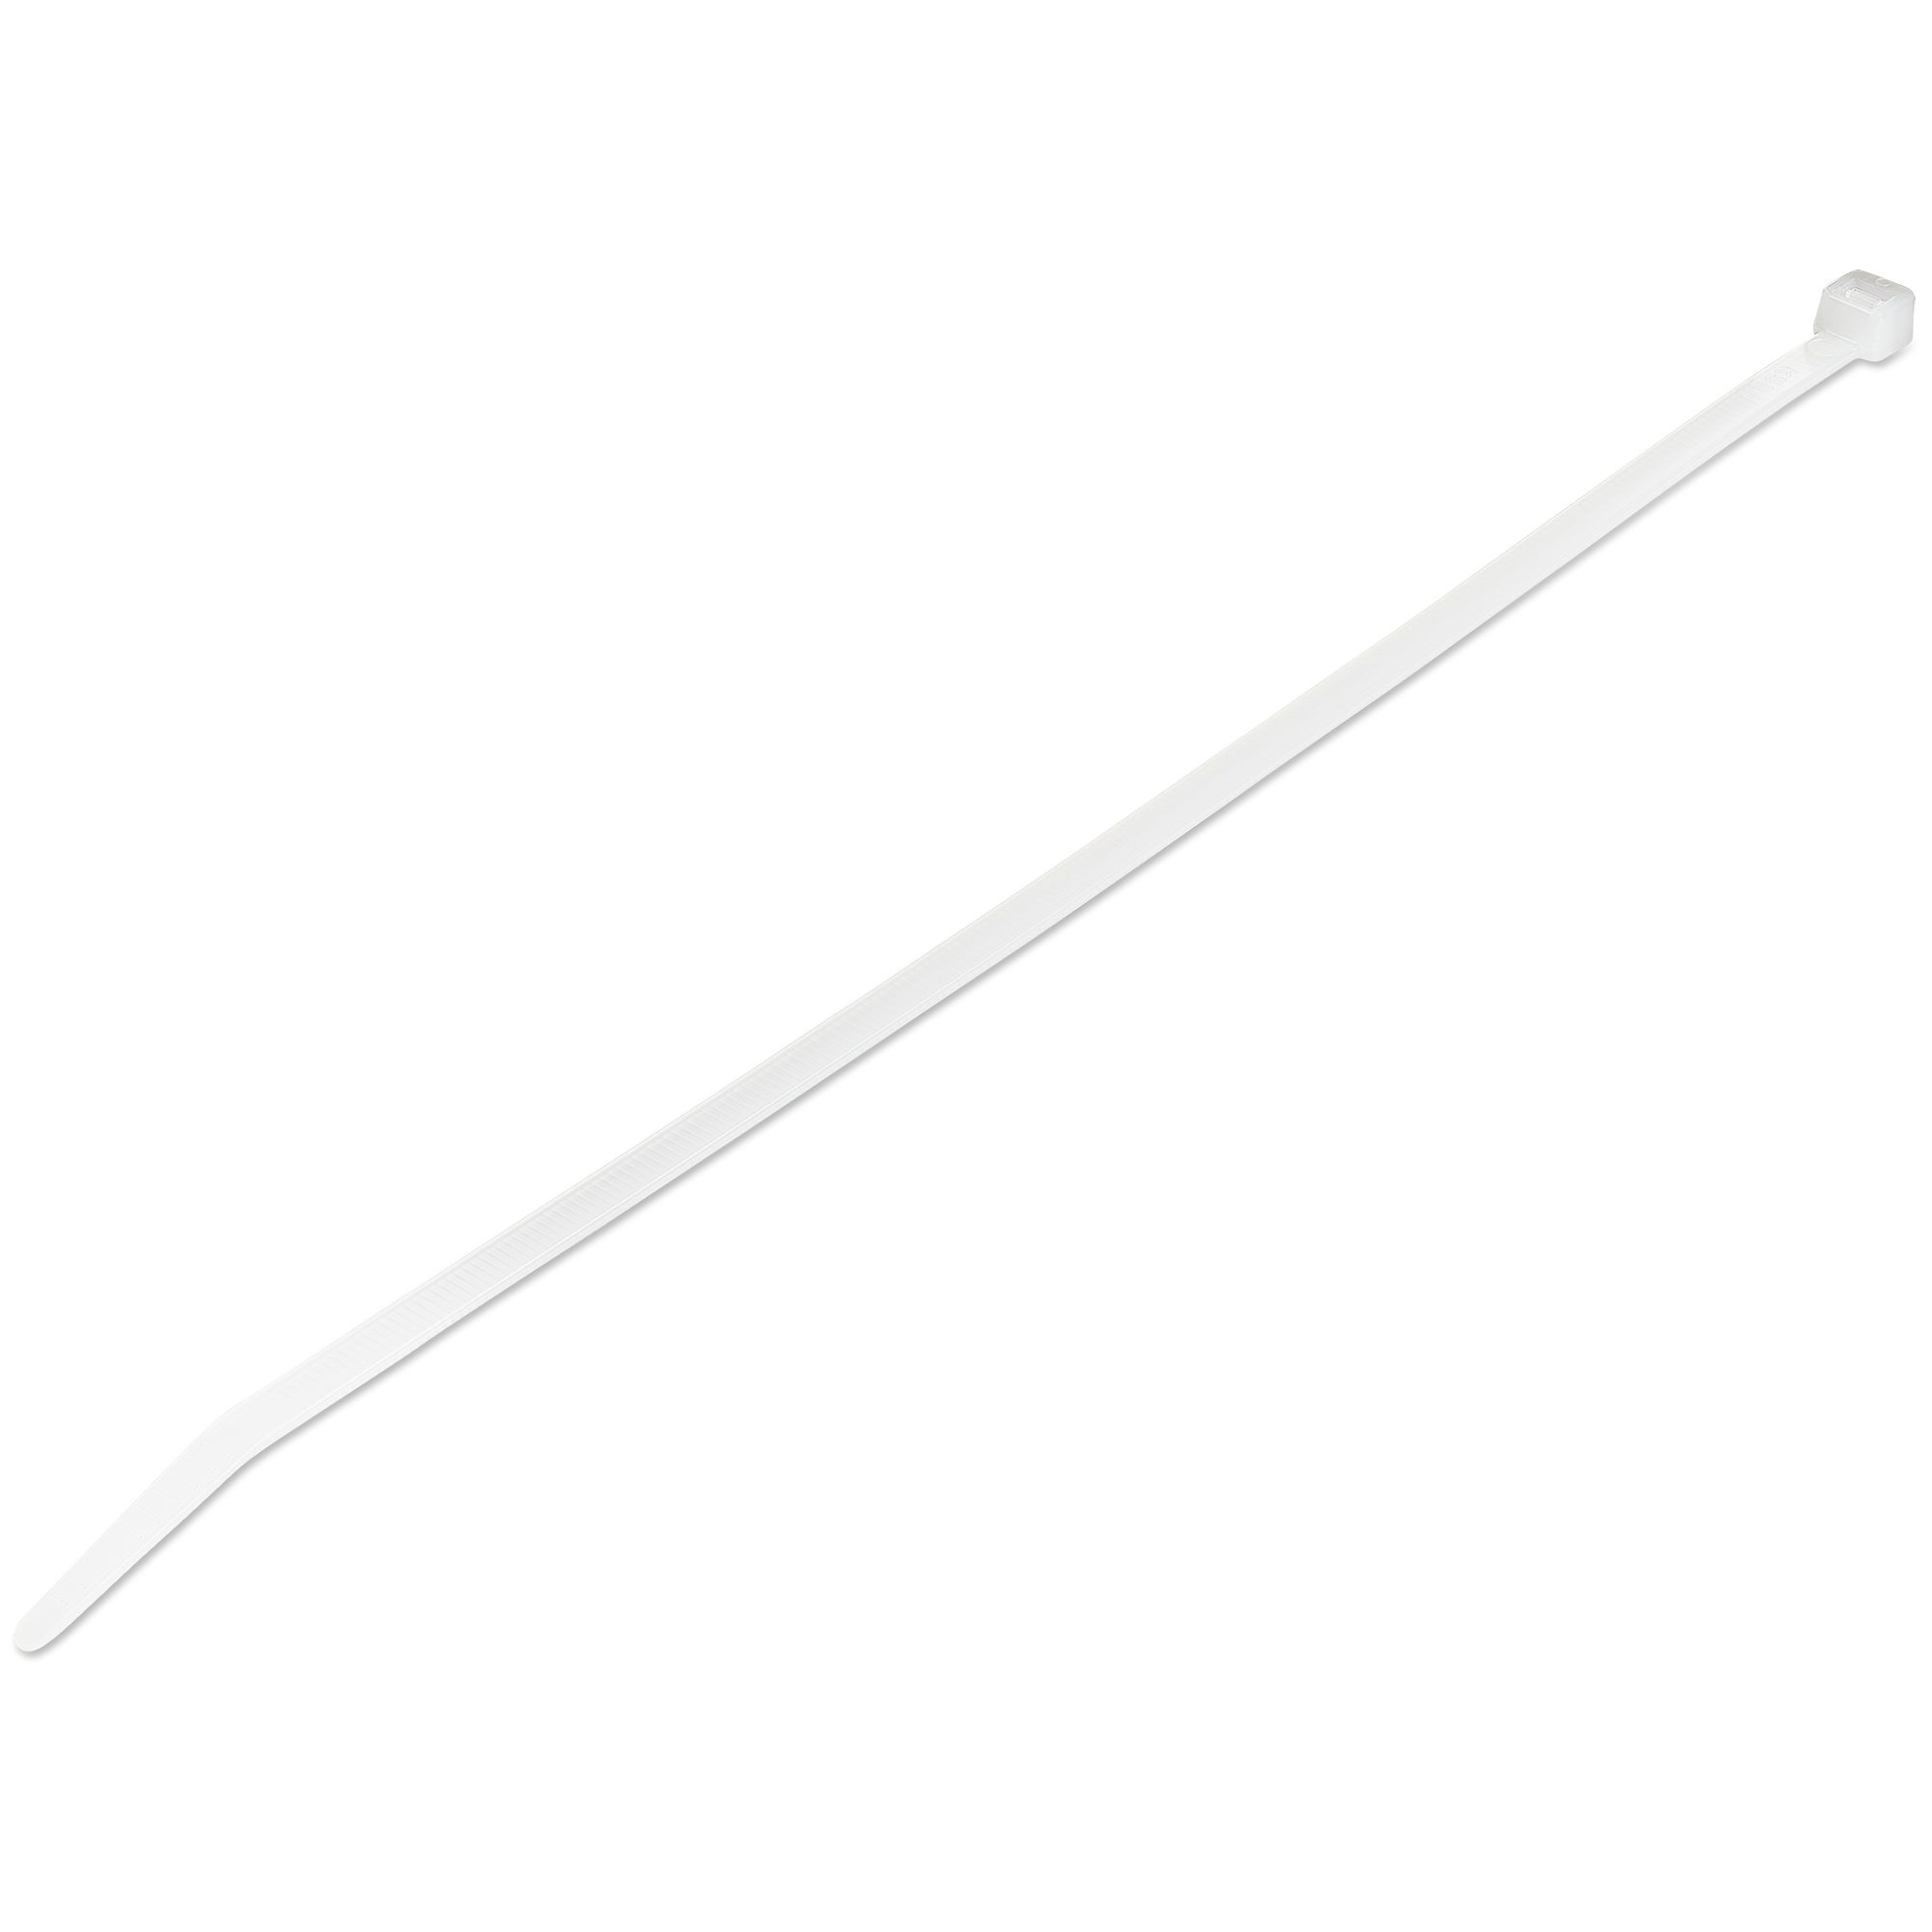 StarTech.com 10(25cm) Cable Ties, 1/8(4mm) wide, 2-5/8(68mm) Bundle Diameter, 50lb(22kg) Tensile Strength, Nylon Self Locking Zip Ties w/ Curved Tip, 94V-2/UL Listed, 100 Pack, White - Nylon 66 Plastic - TAA (CBMZT10N)